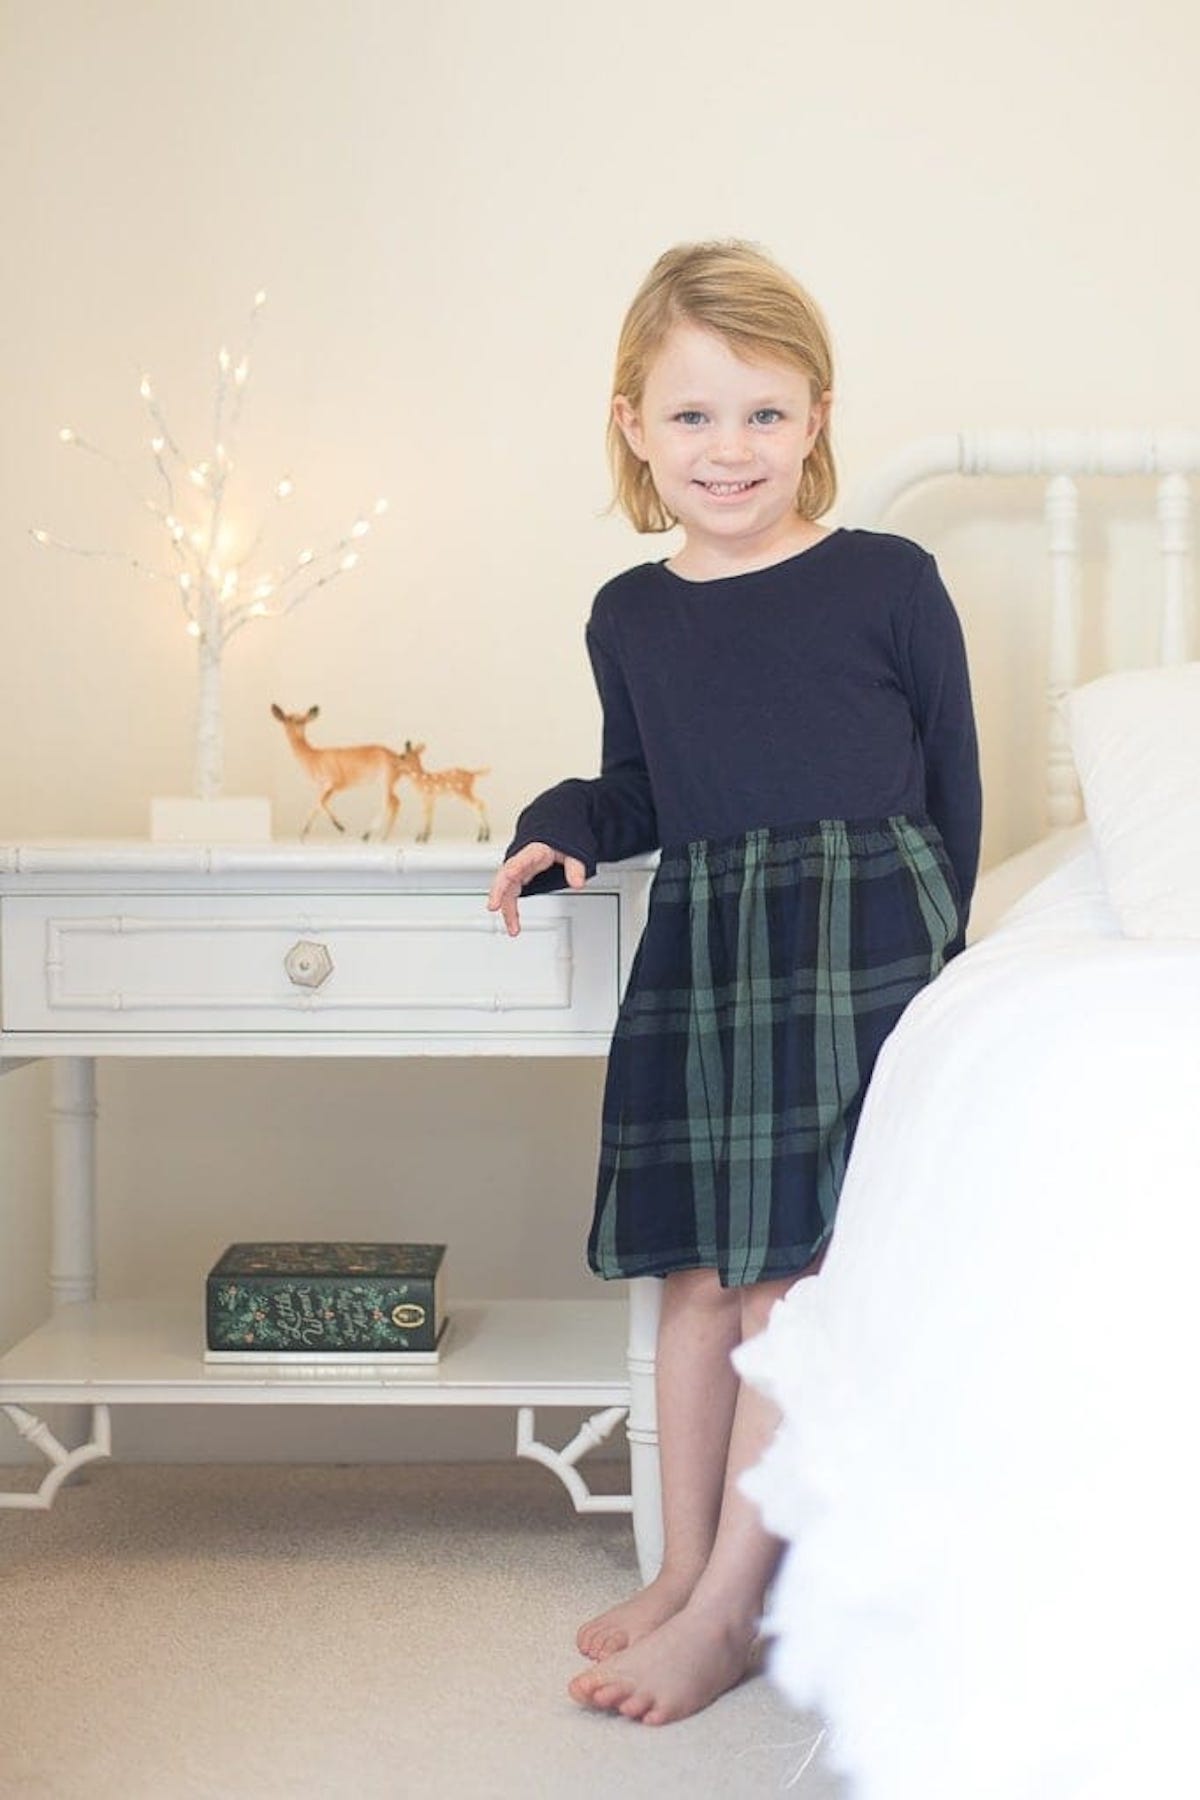 A little girl in a plaid dress standing in front of a white dresser, filled with Christmas magic.